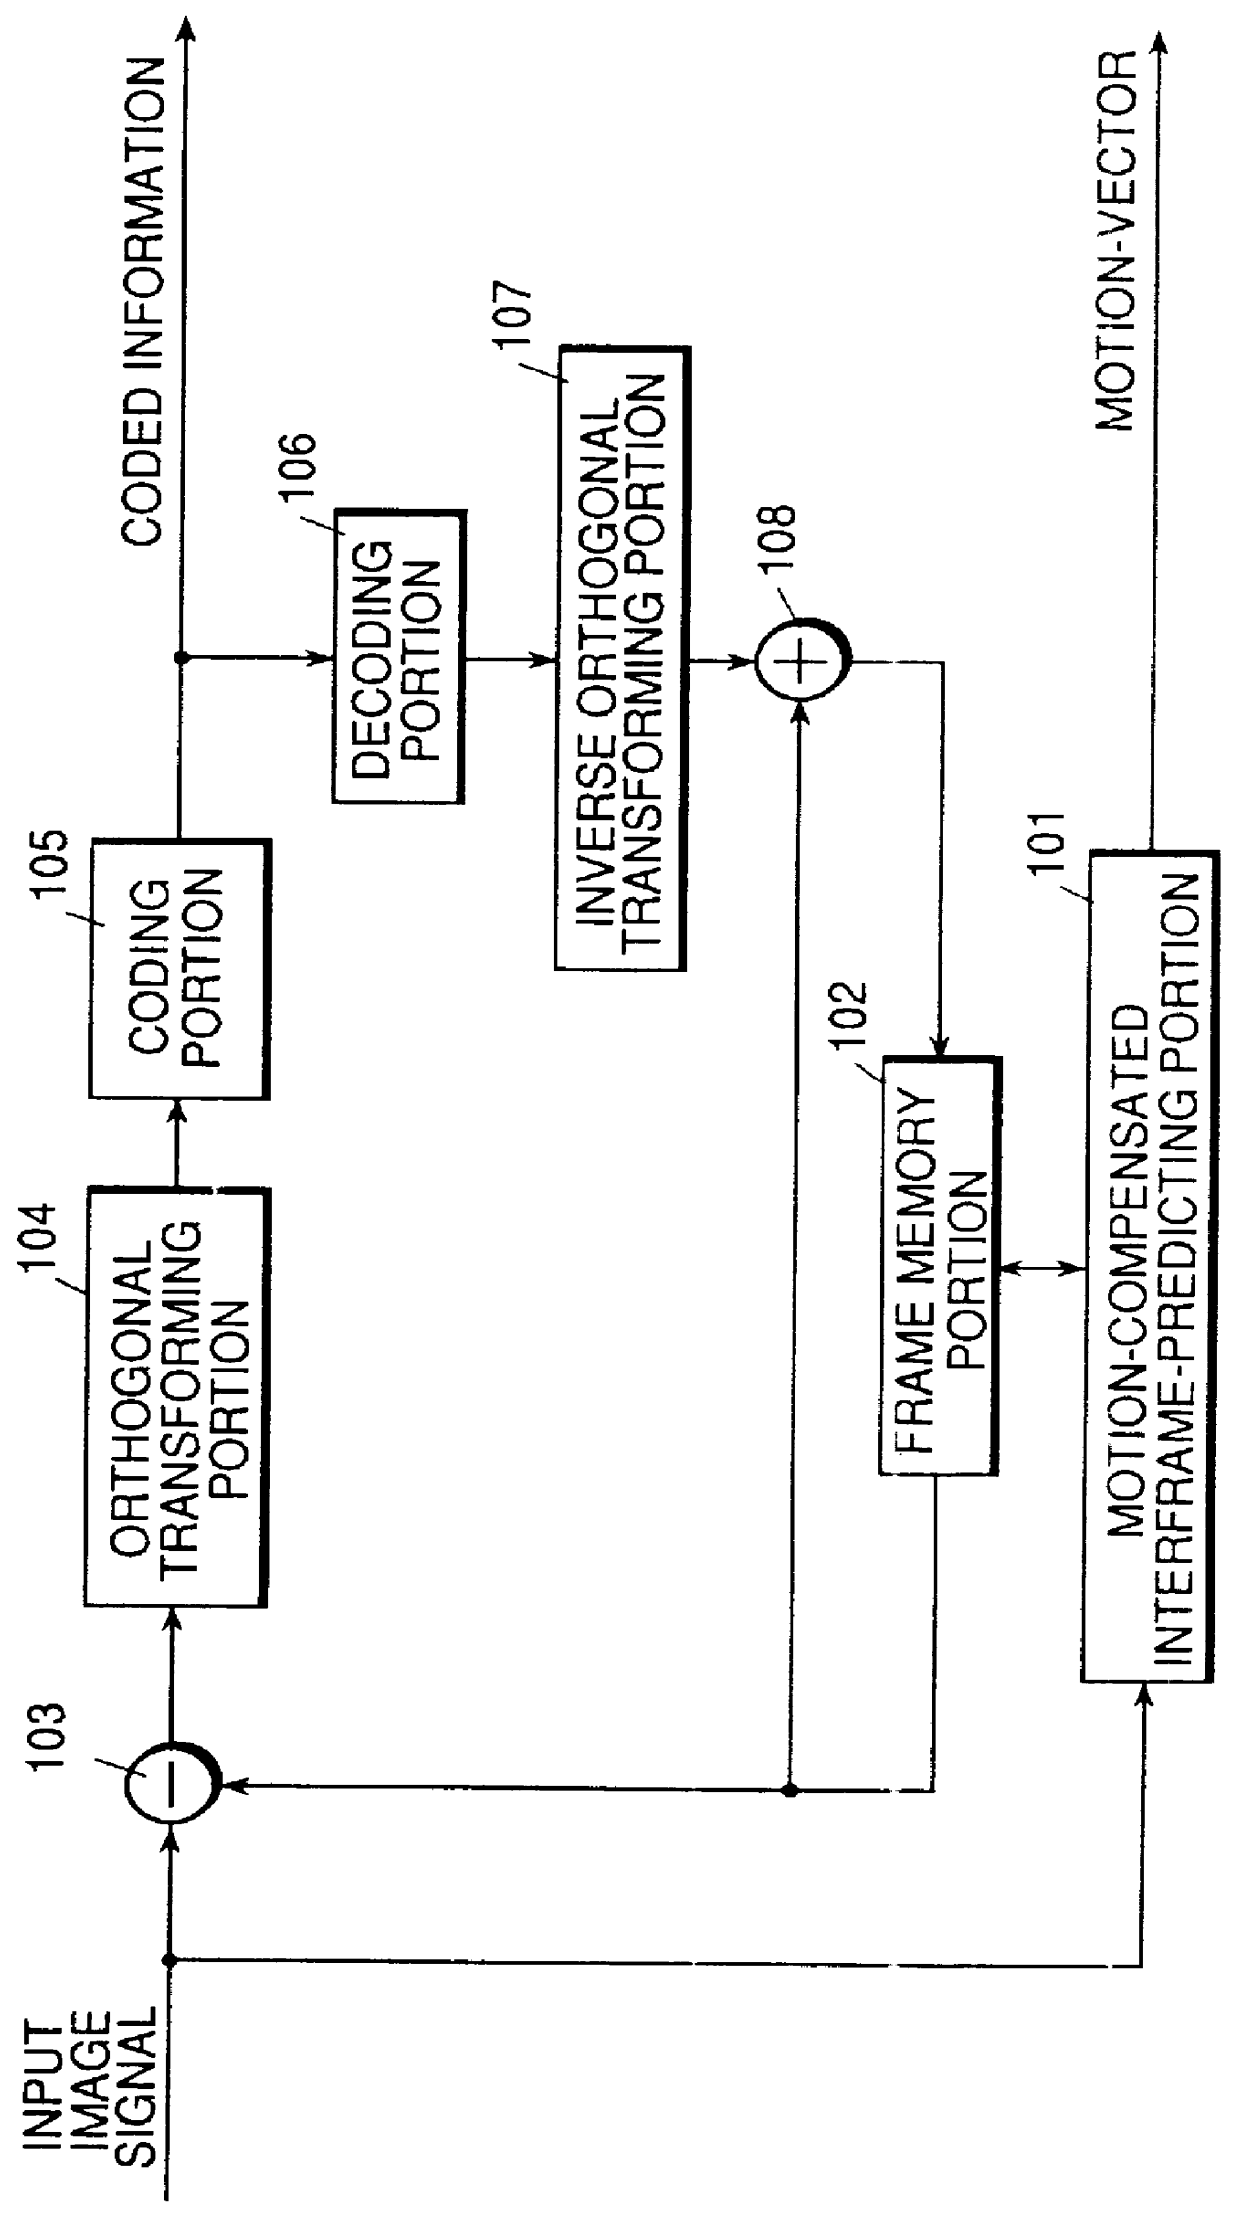 Video-coding device and video-decoding device